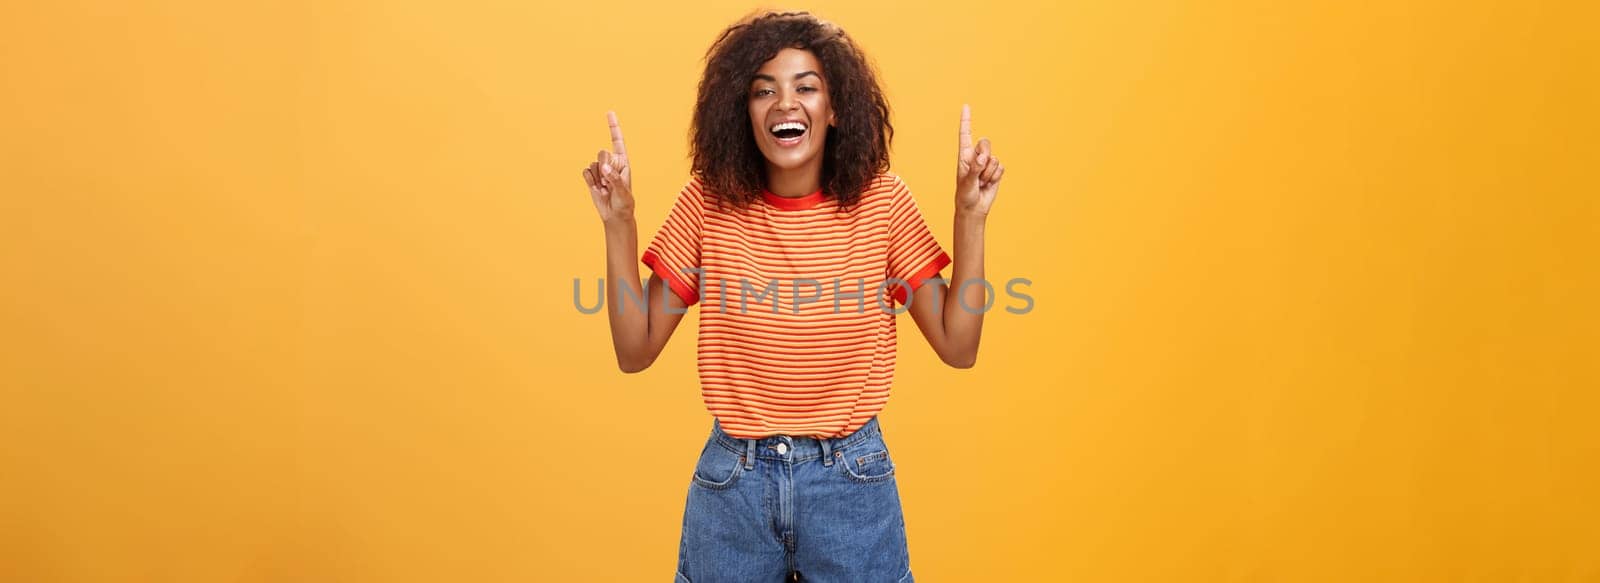 Woman feeling amused and entertained. Portrait of happy carefree stylish African-American girl with afro hairstyle laughing out loud joyfully pointing up with raised arms over orange wall by Benzoix